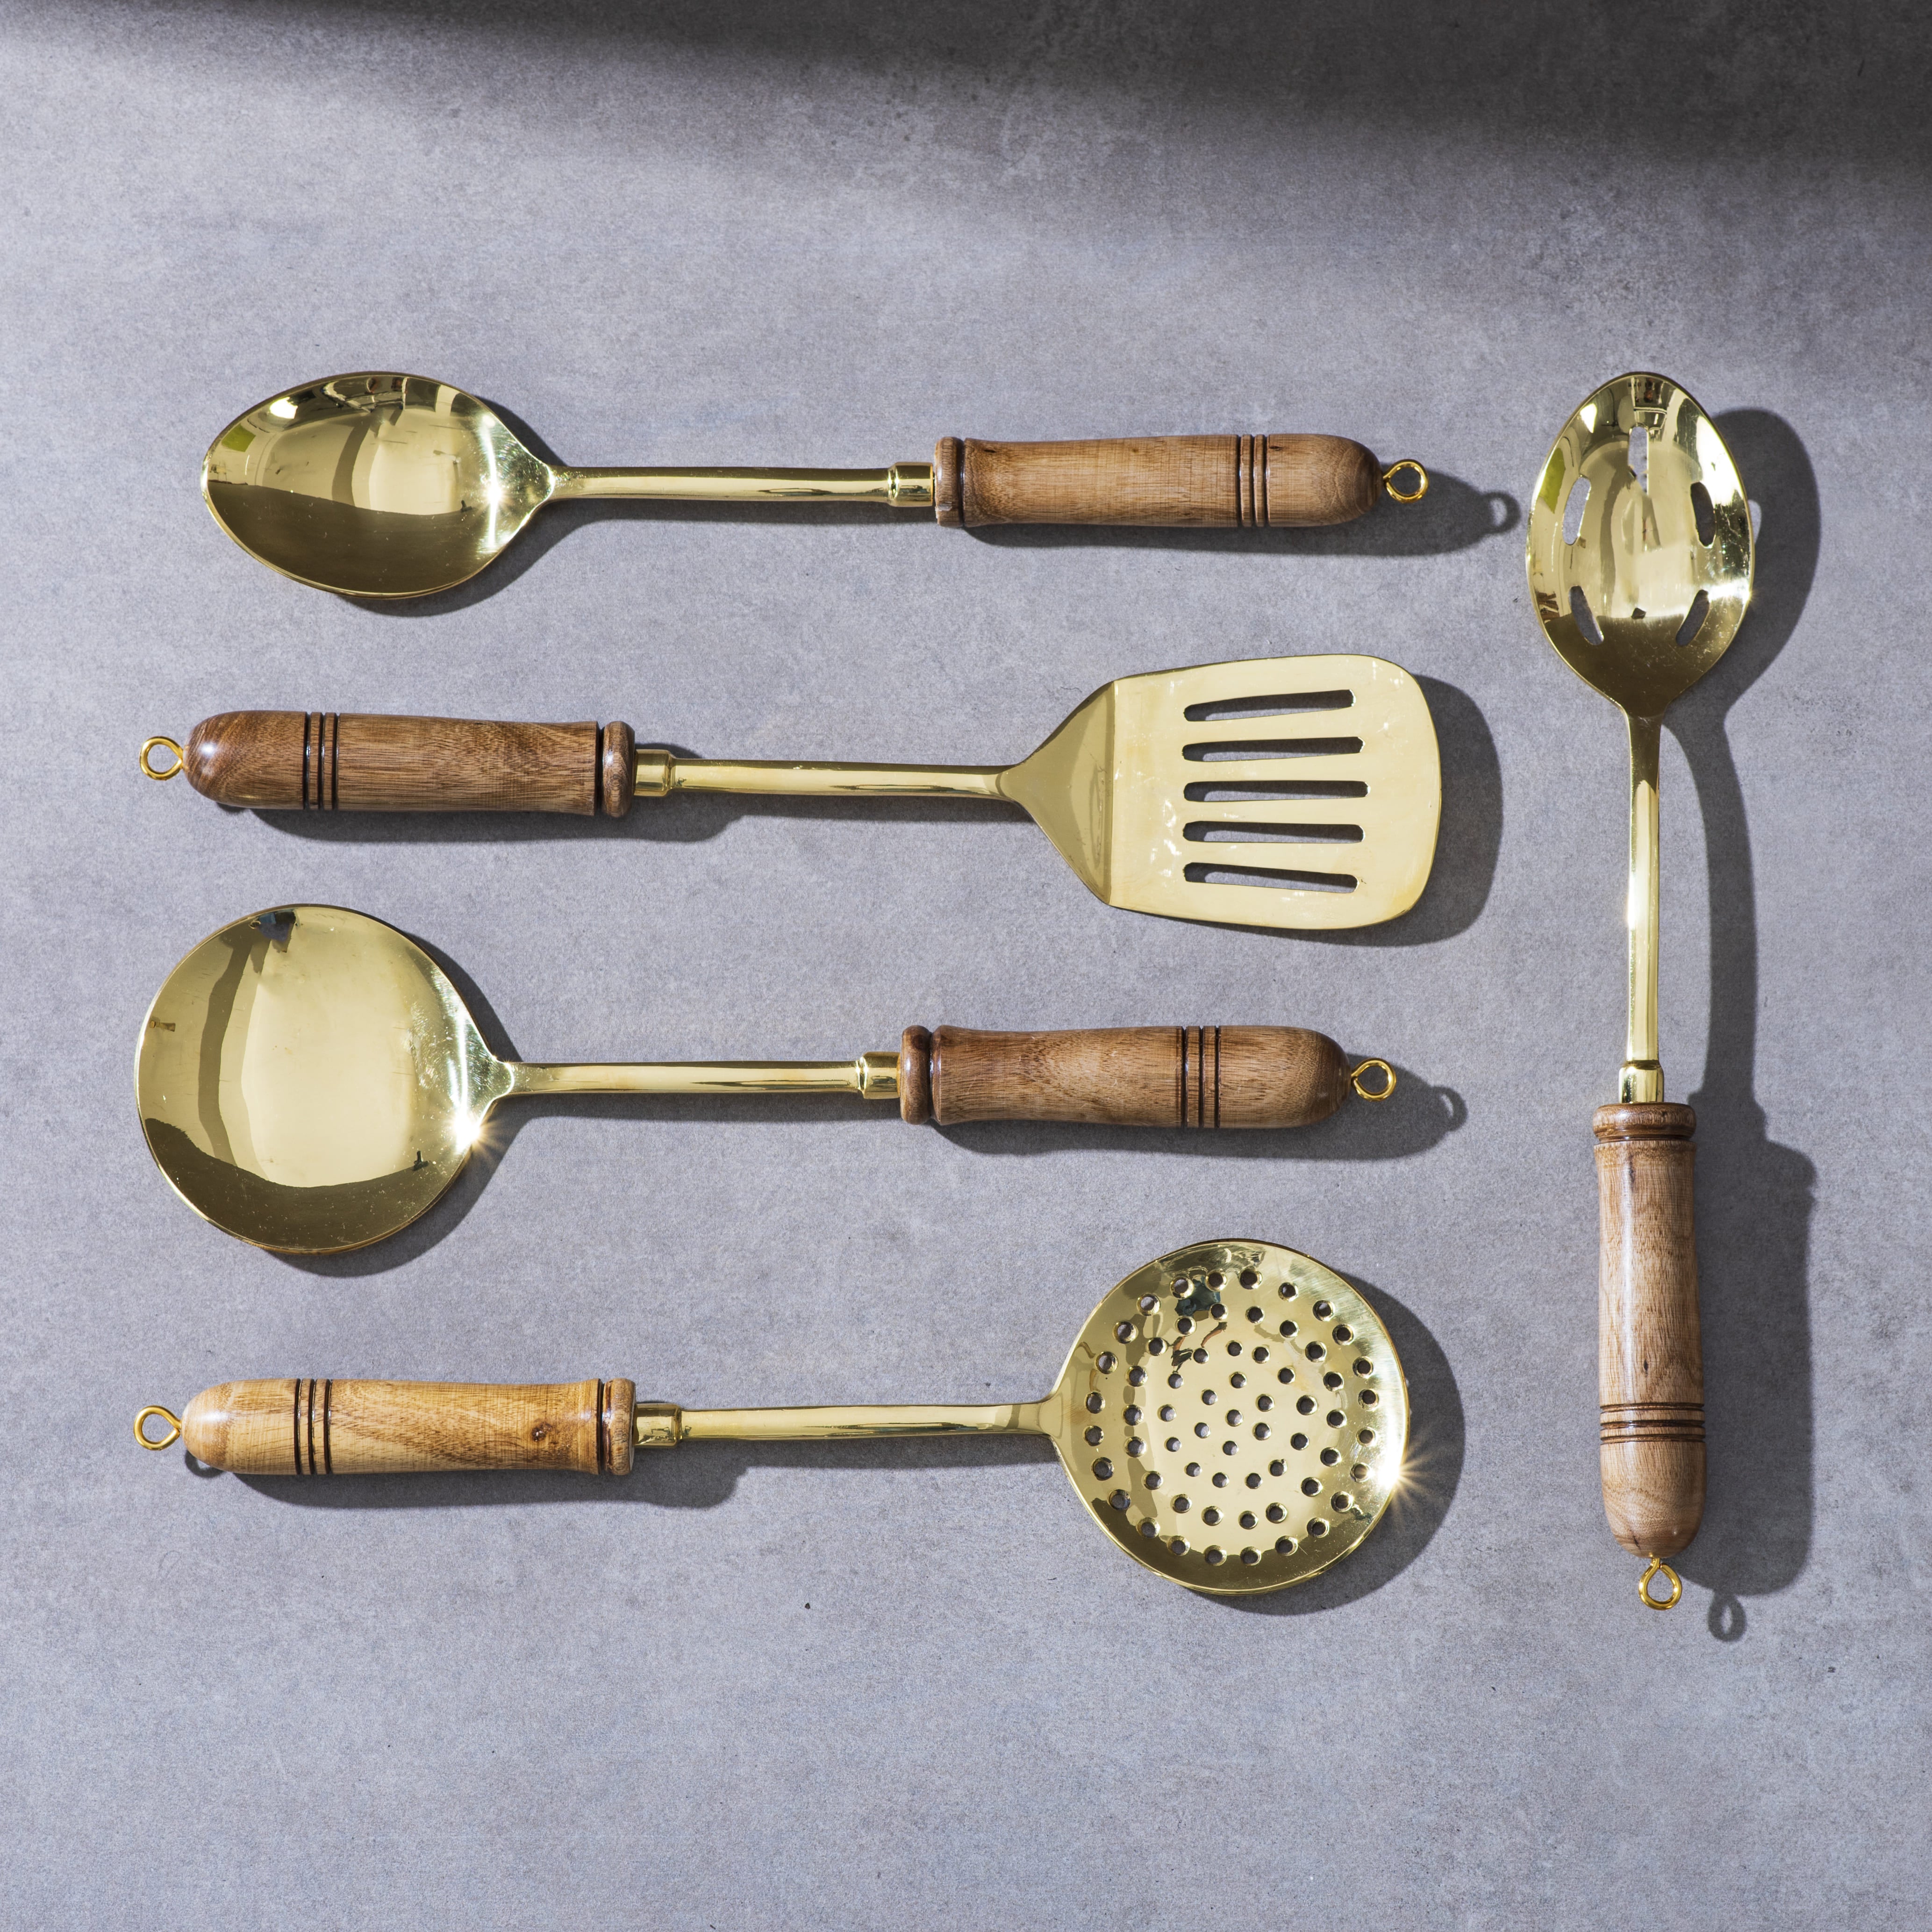 Buy Brass Cookware Ladles Set Online - Authentic and Functional